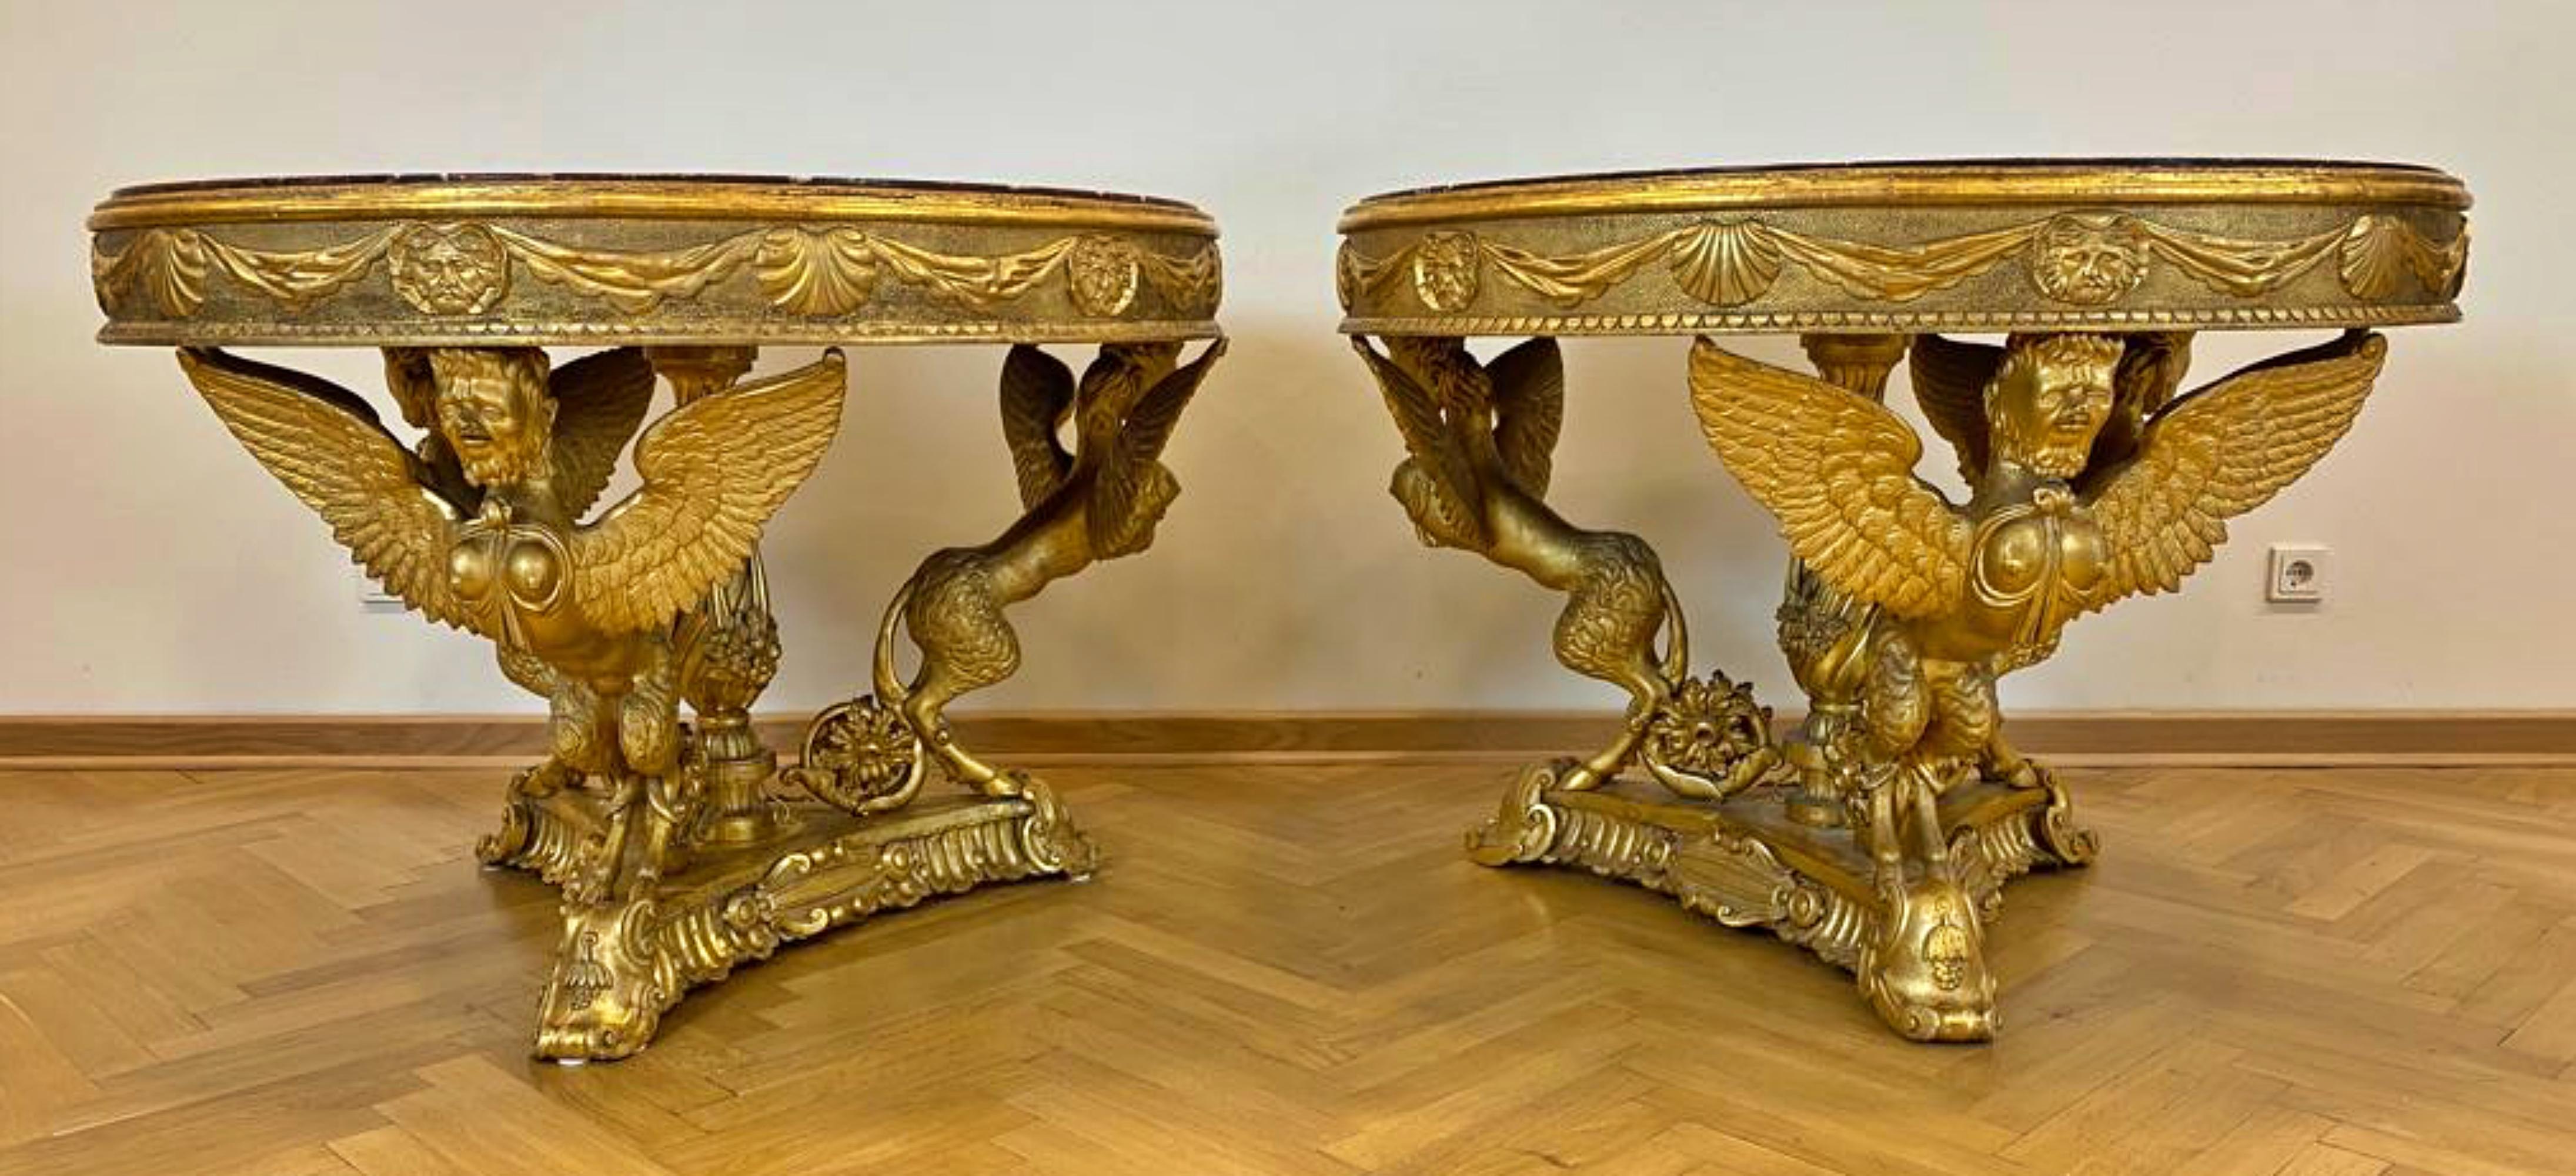 Impressive Pair of Tables First Empire Napoleon III Early 19th Century For Sale 5